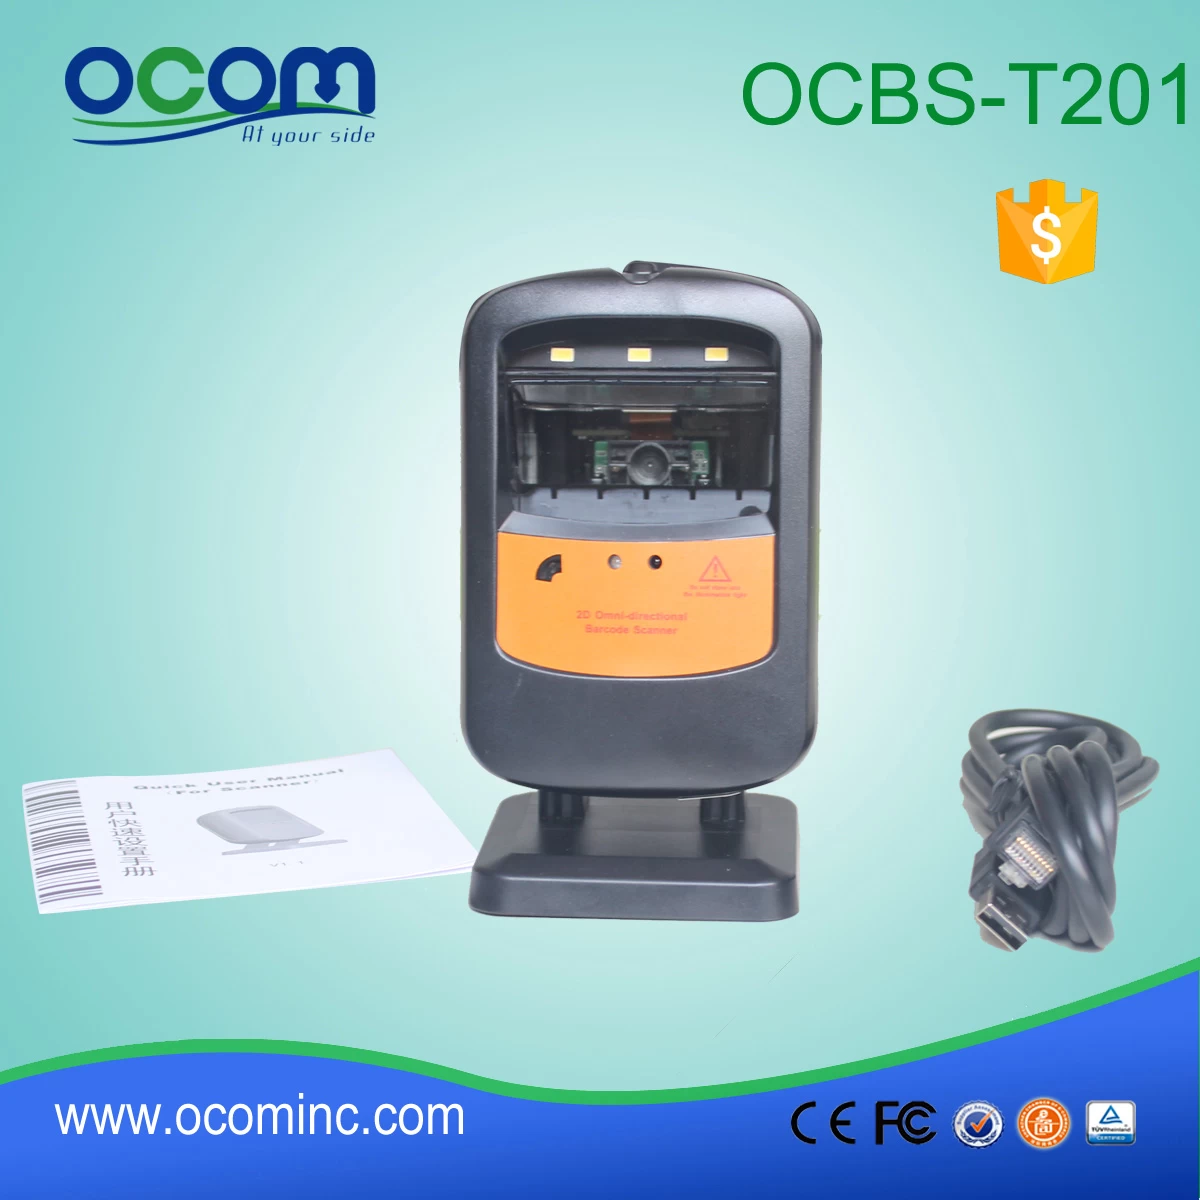 2D Omni-directional Automatic Image Laser Barcode Scanner OCBS-T201